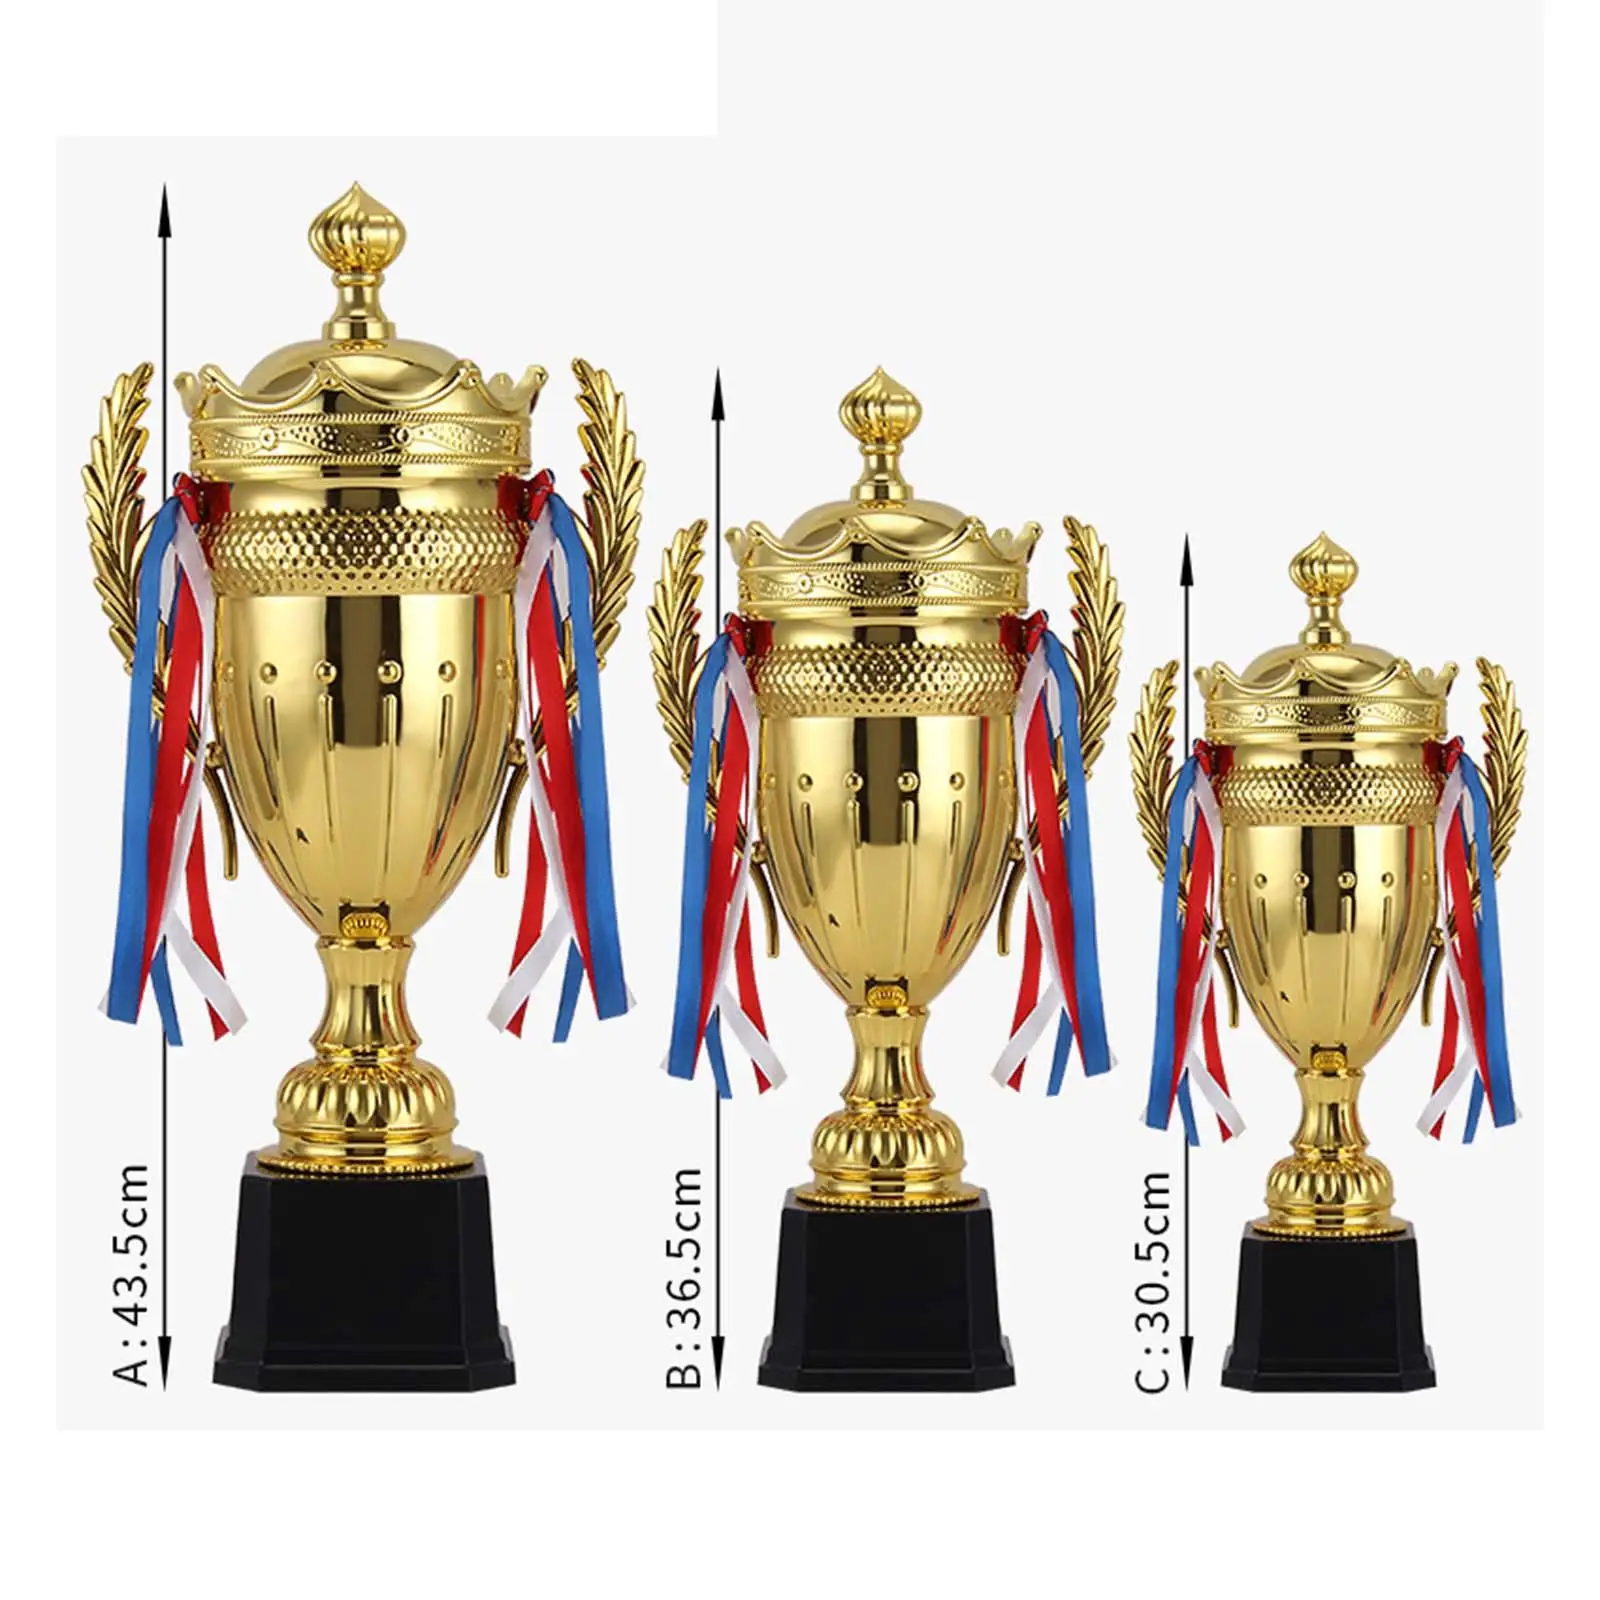 Children Trophy Delicate Fine Workmanship Fashion Award Trophy Cup for Party Basketball Celebrations Appreciation Gifts